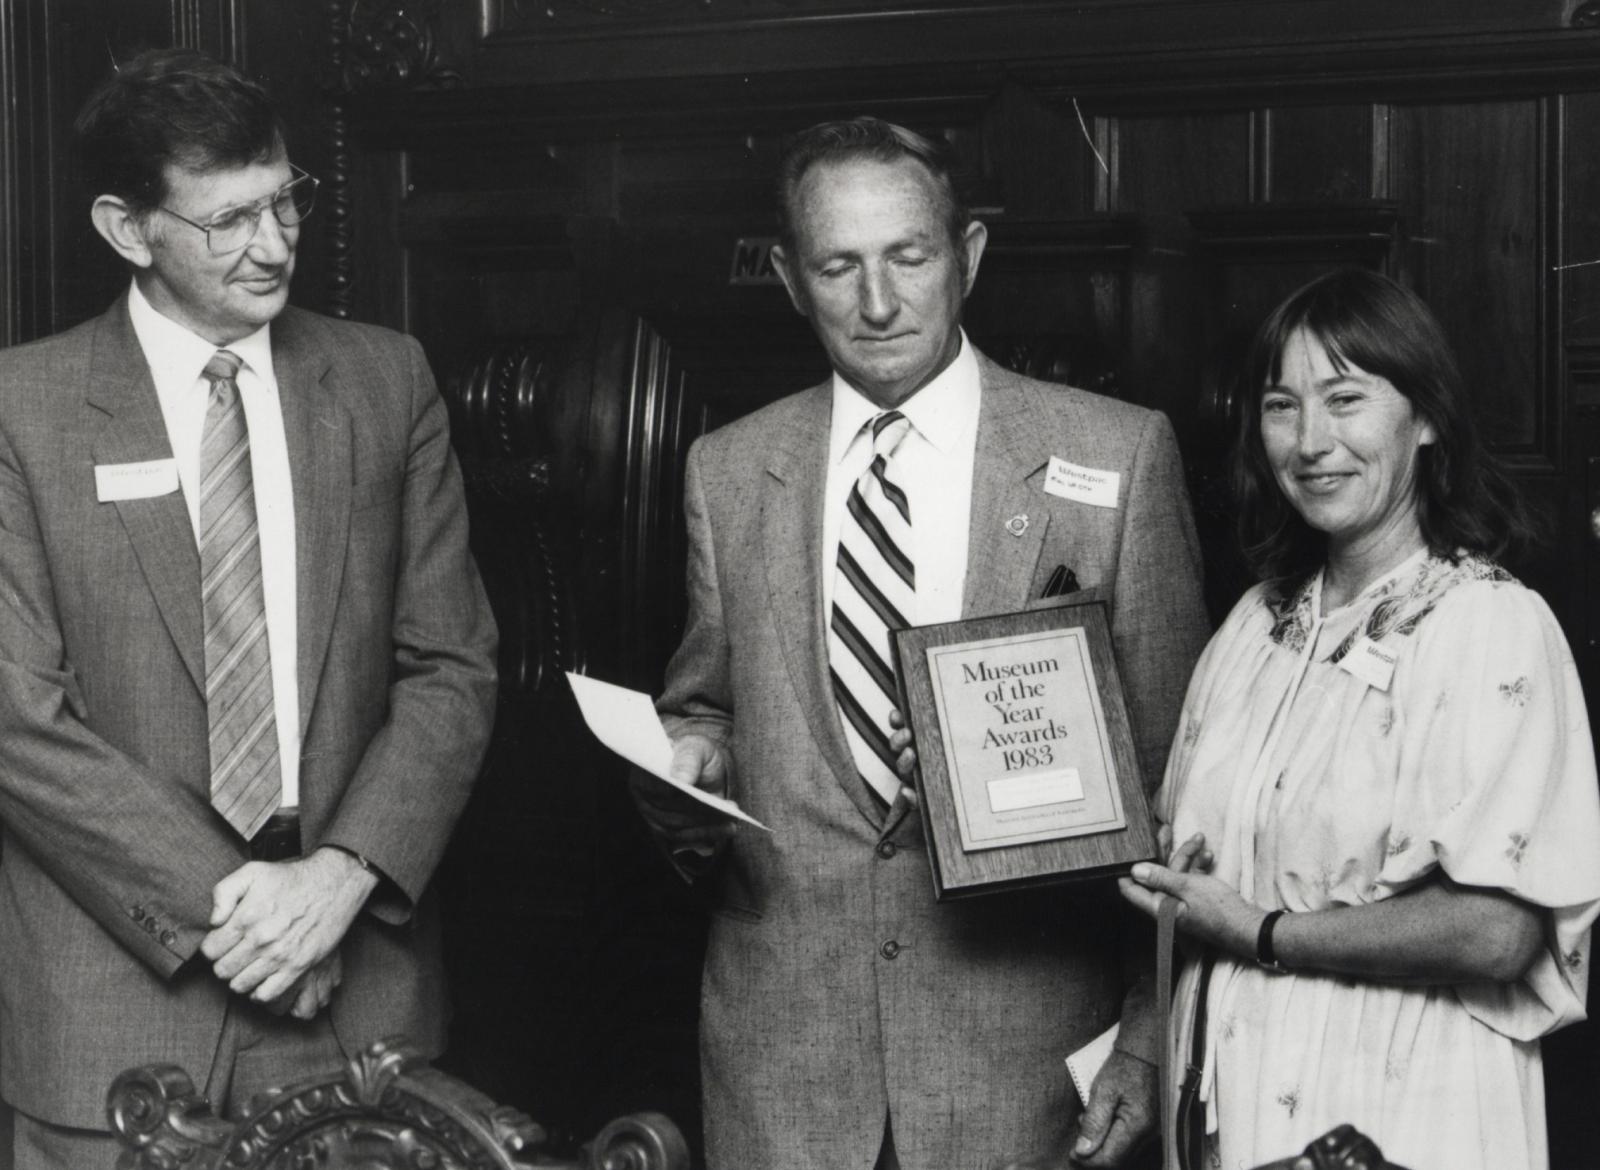 Museum of the year award presentation 1983